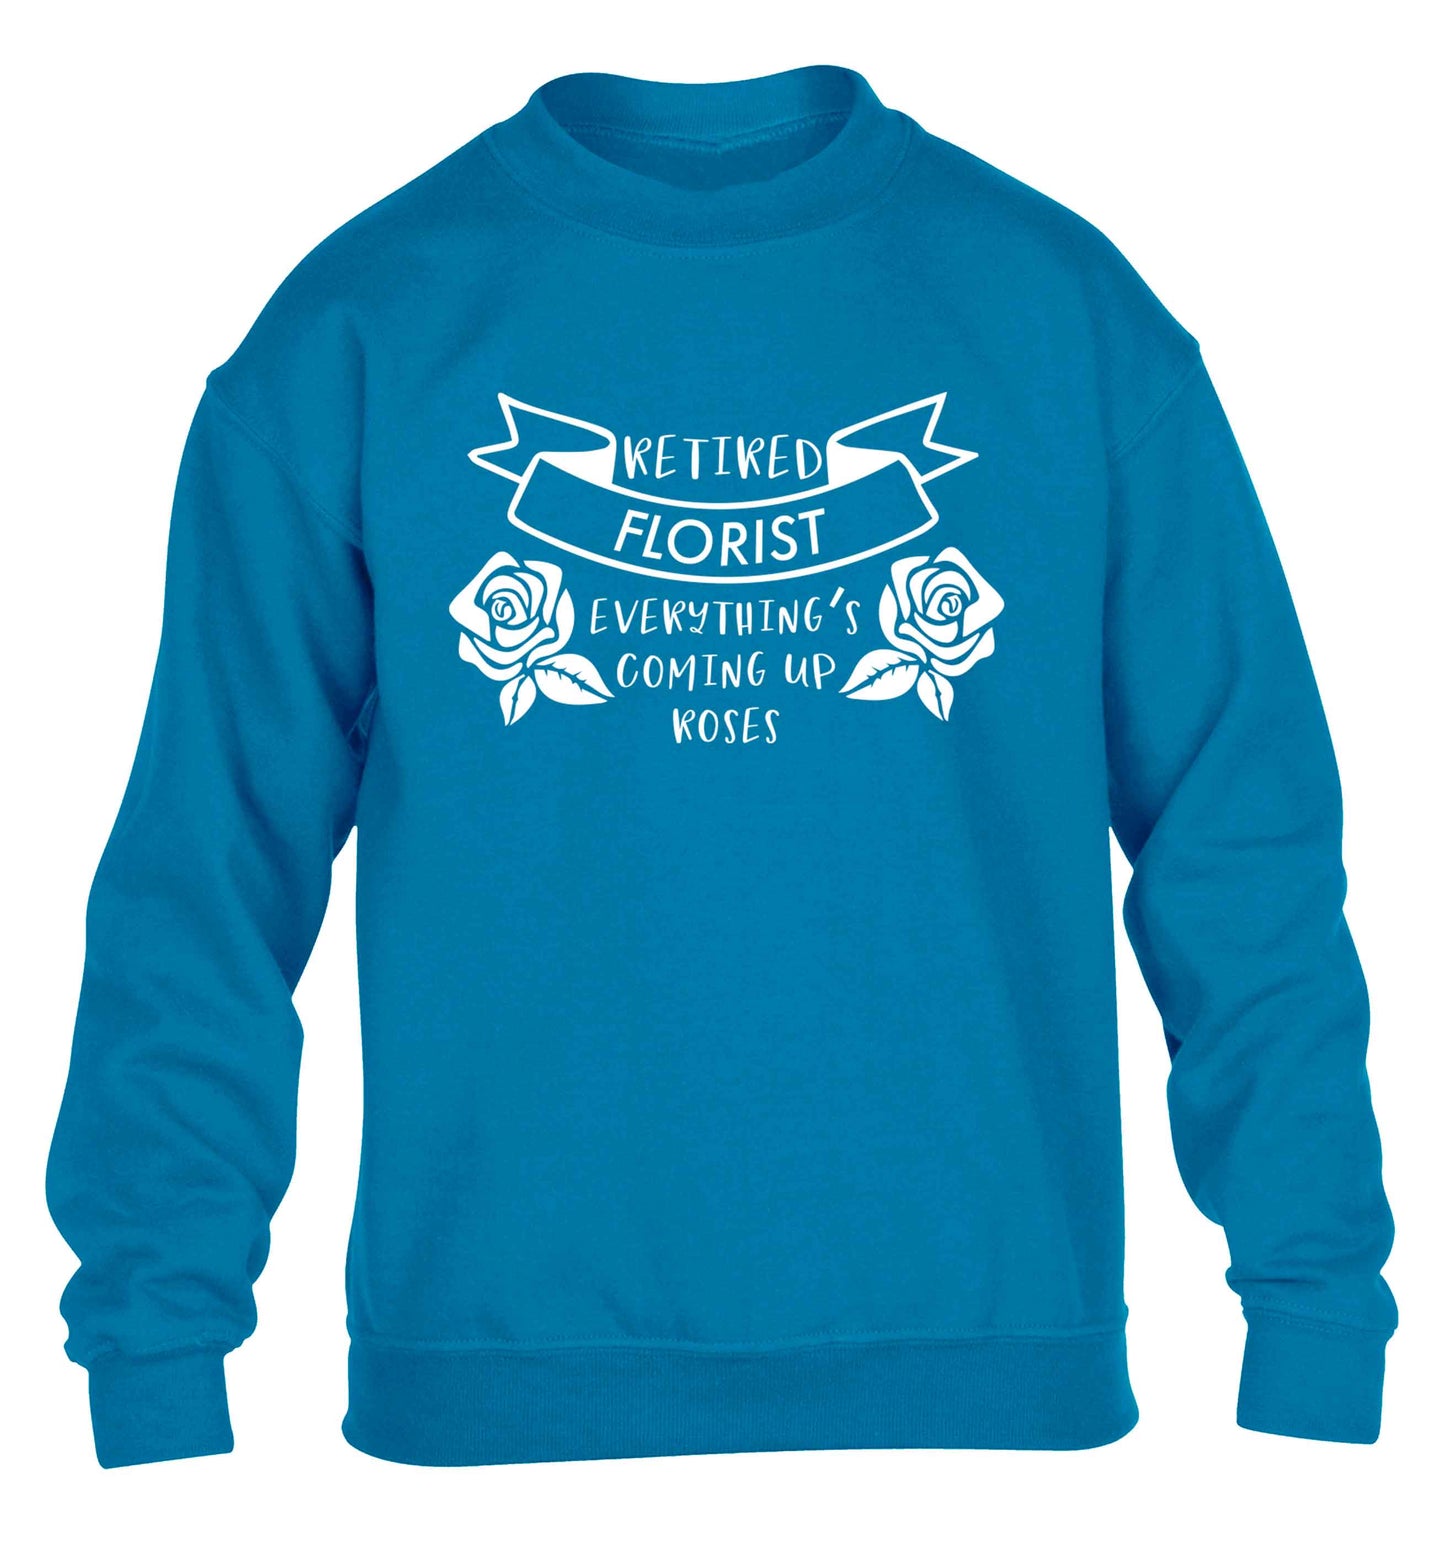 Retired florist everything's coming up roses children's blue sweater 12-13 Years